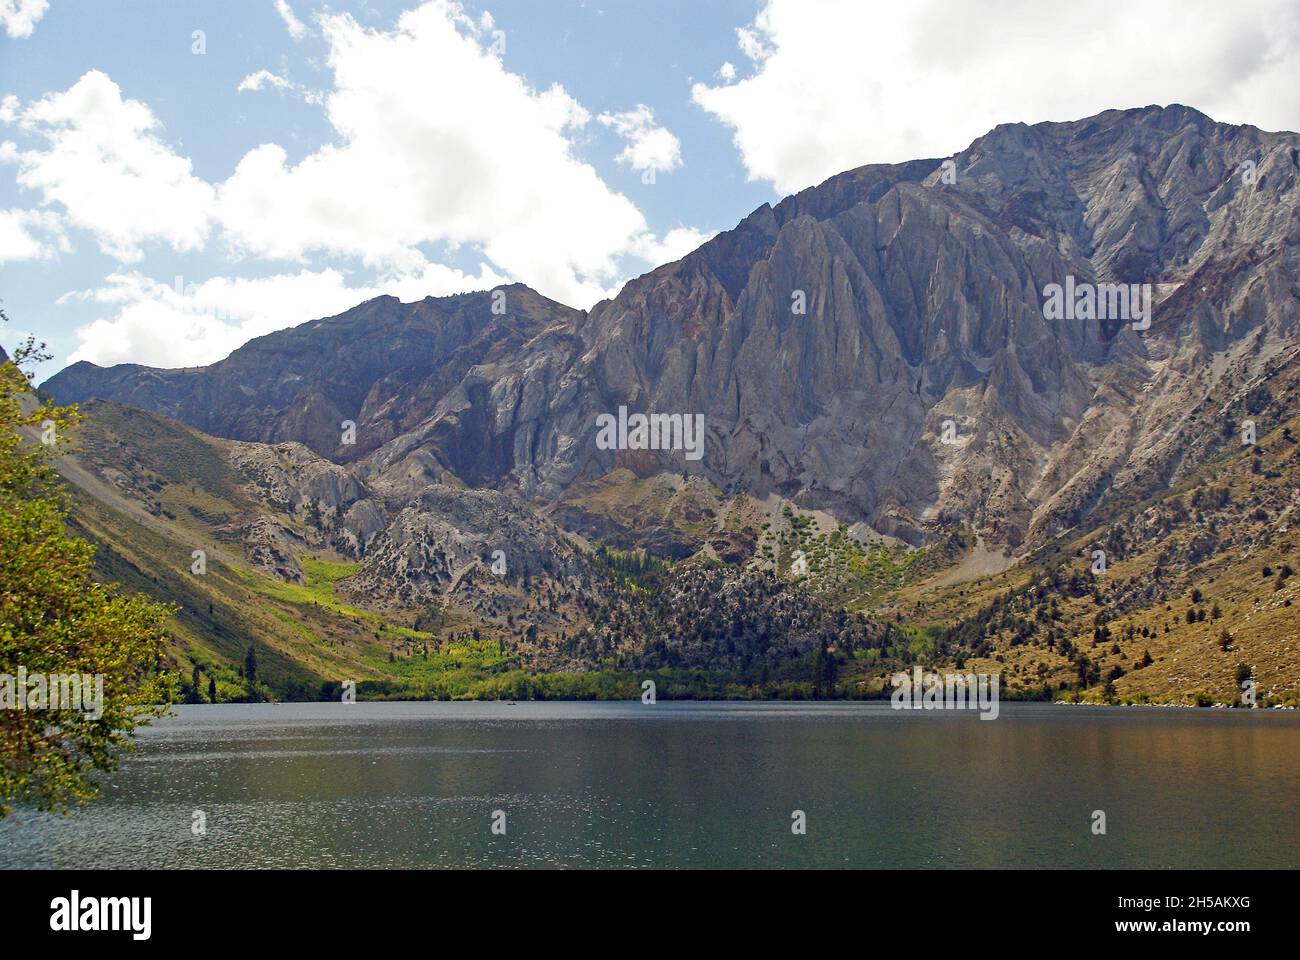 California, USA: Convict Lake and Mount Morrison in the Sierra Nevada mountains. Stock Photo